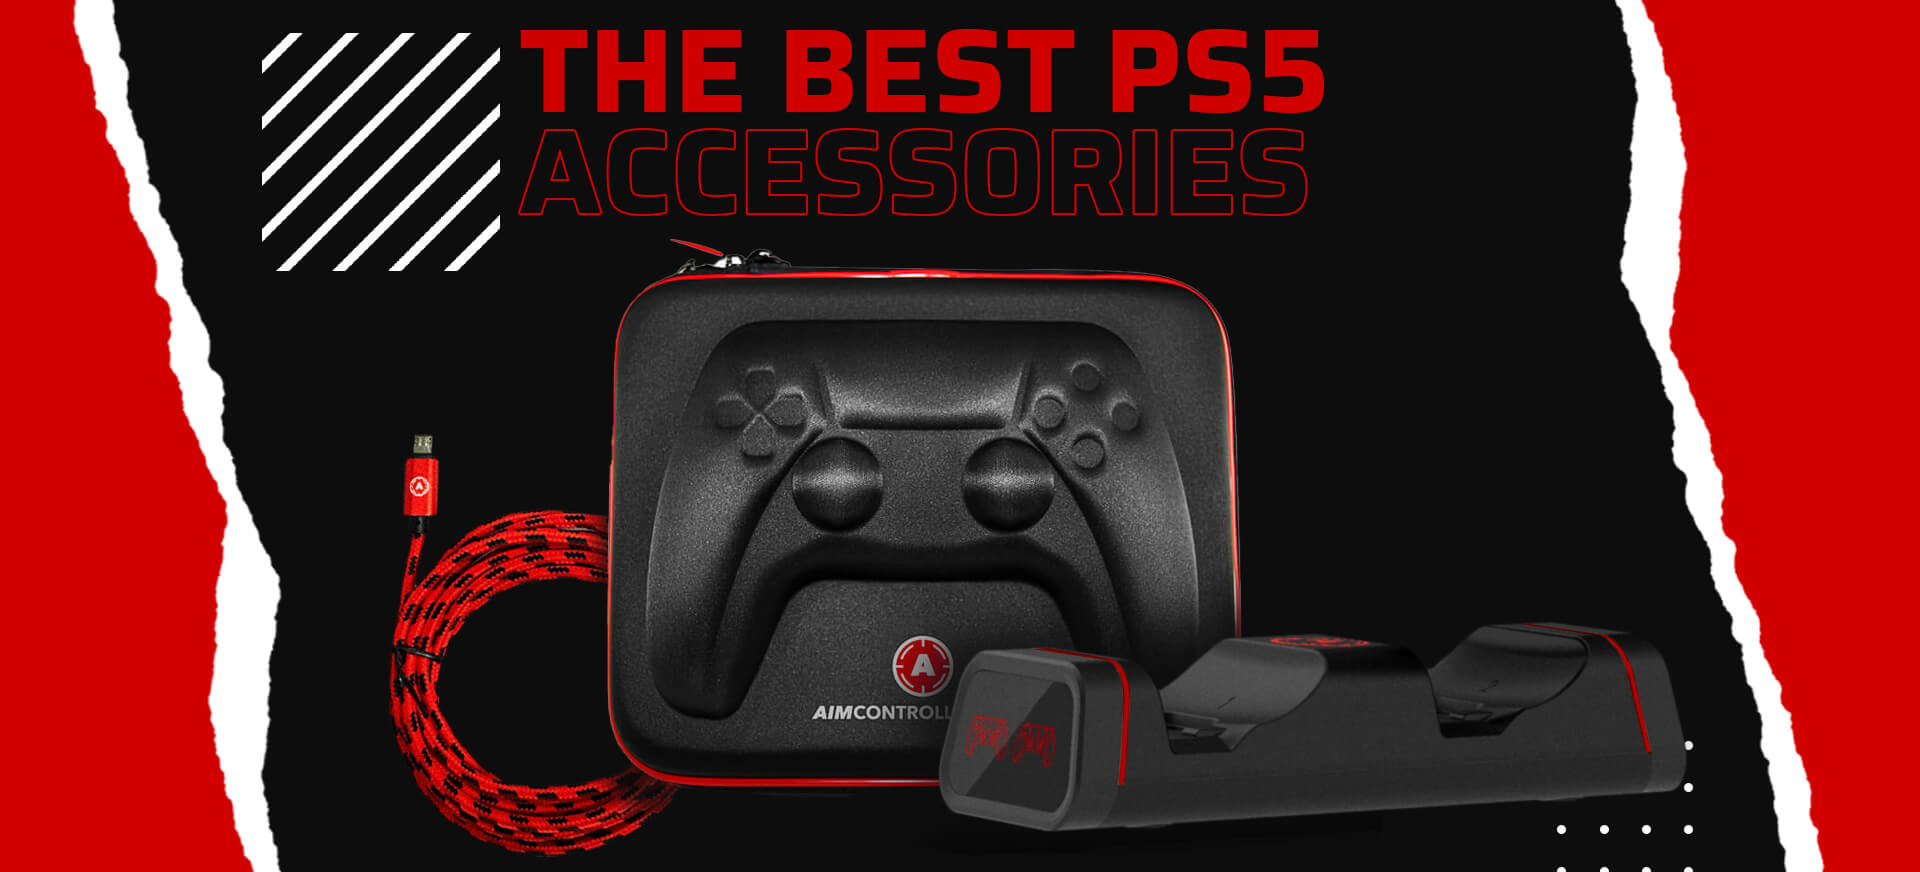 The Best PS5 Accessories MustHaves for the PS5 AimControllers